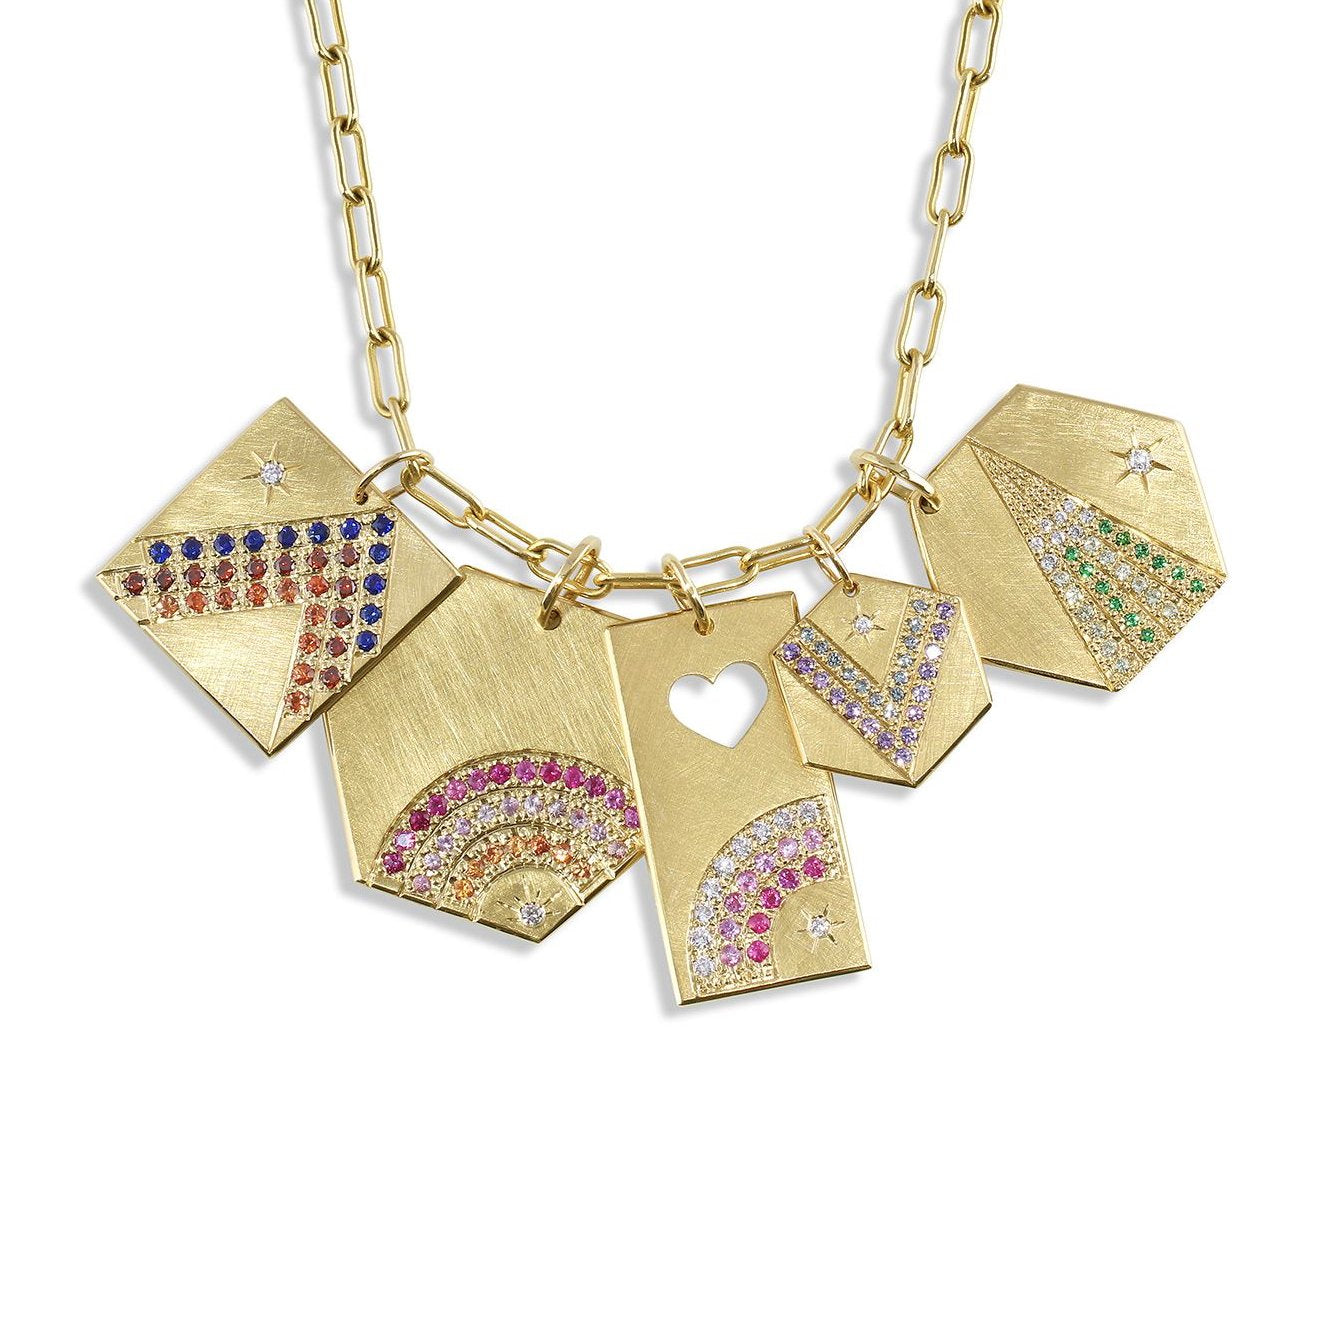 Colorful gemstones and diamonds adorn the charms and pendants of the Better Days Collection